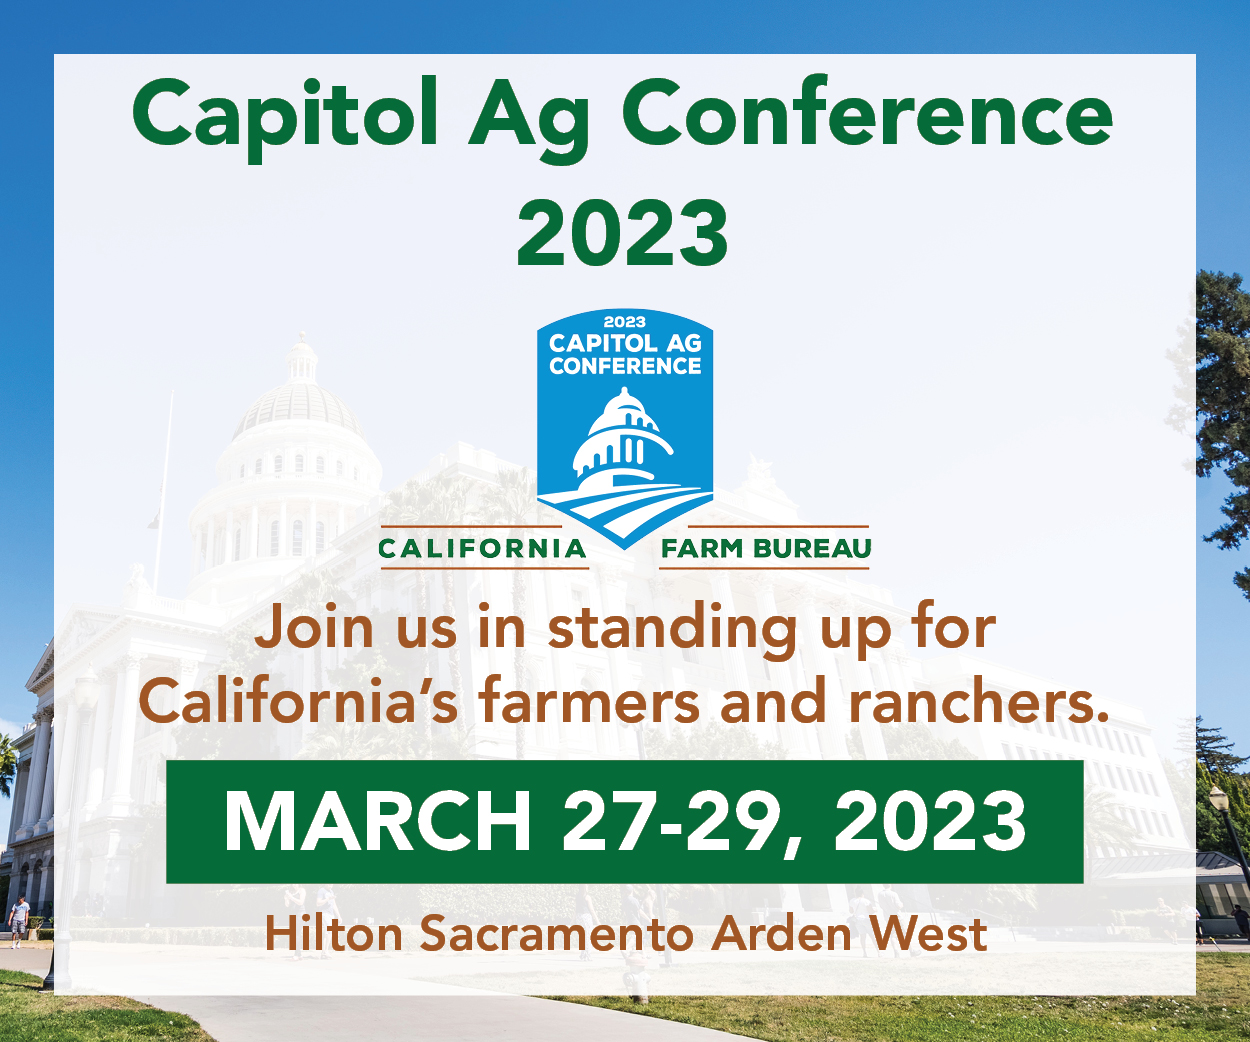 Capitol Ag Conference 2023